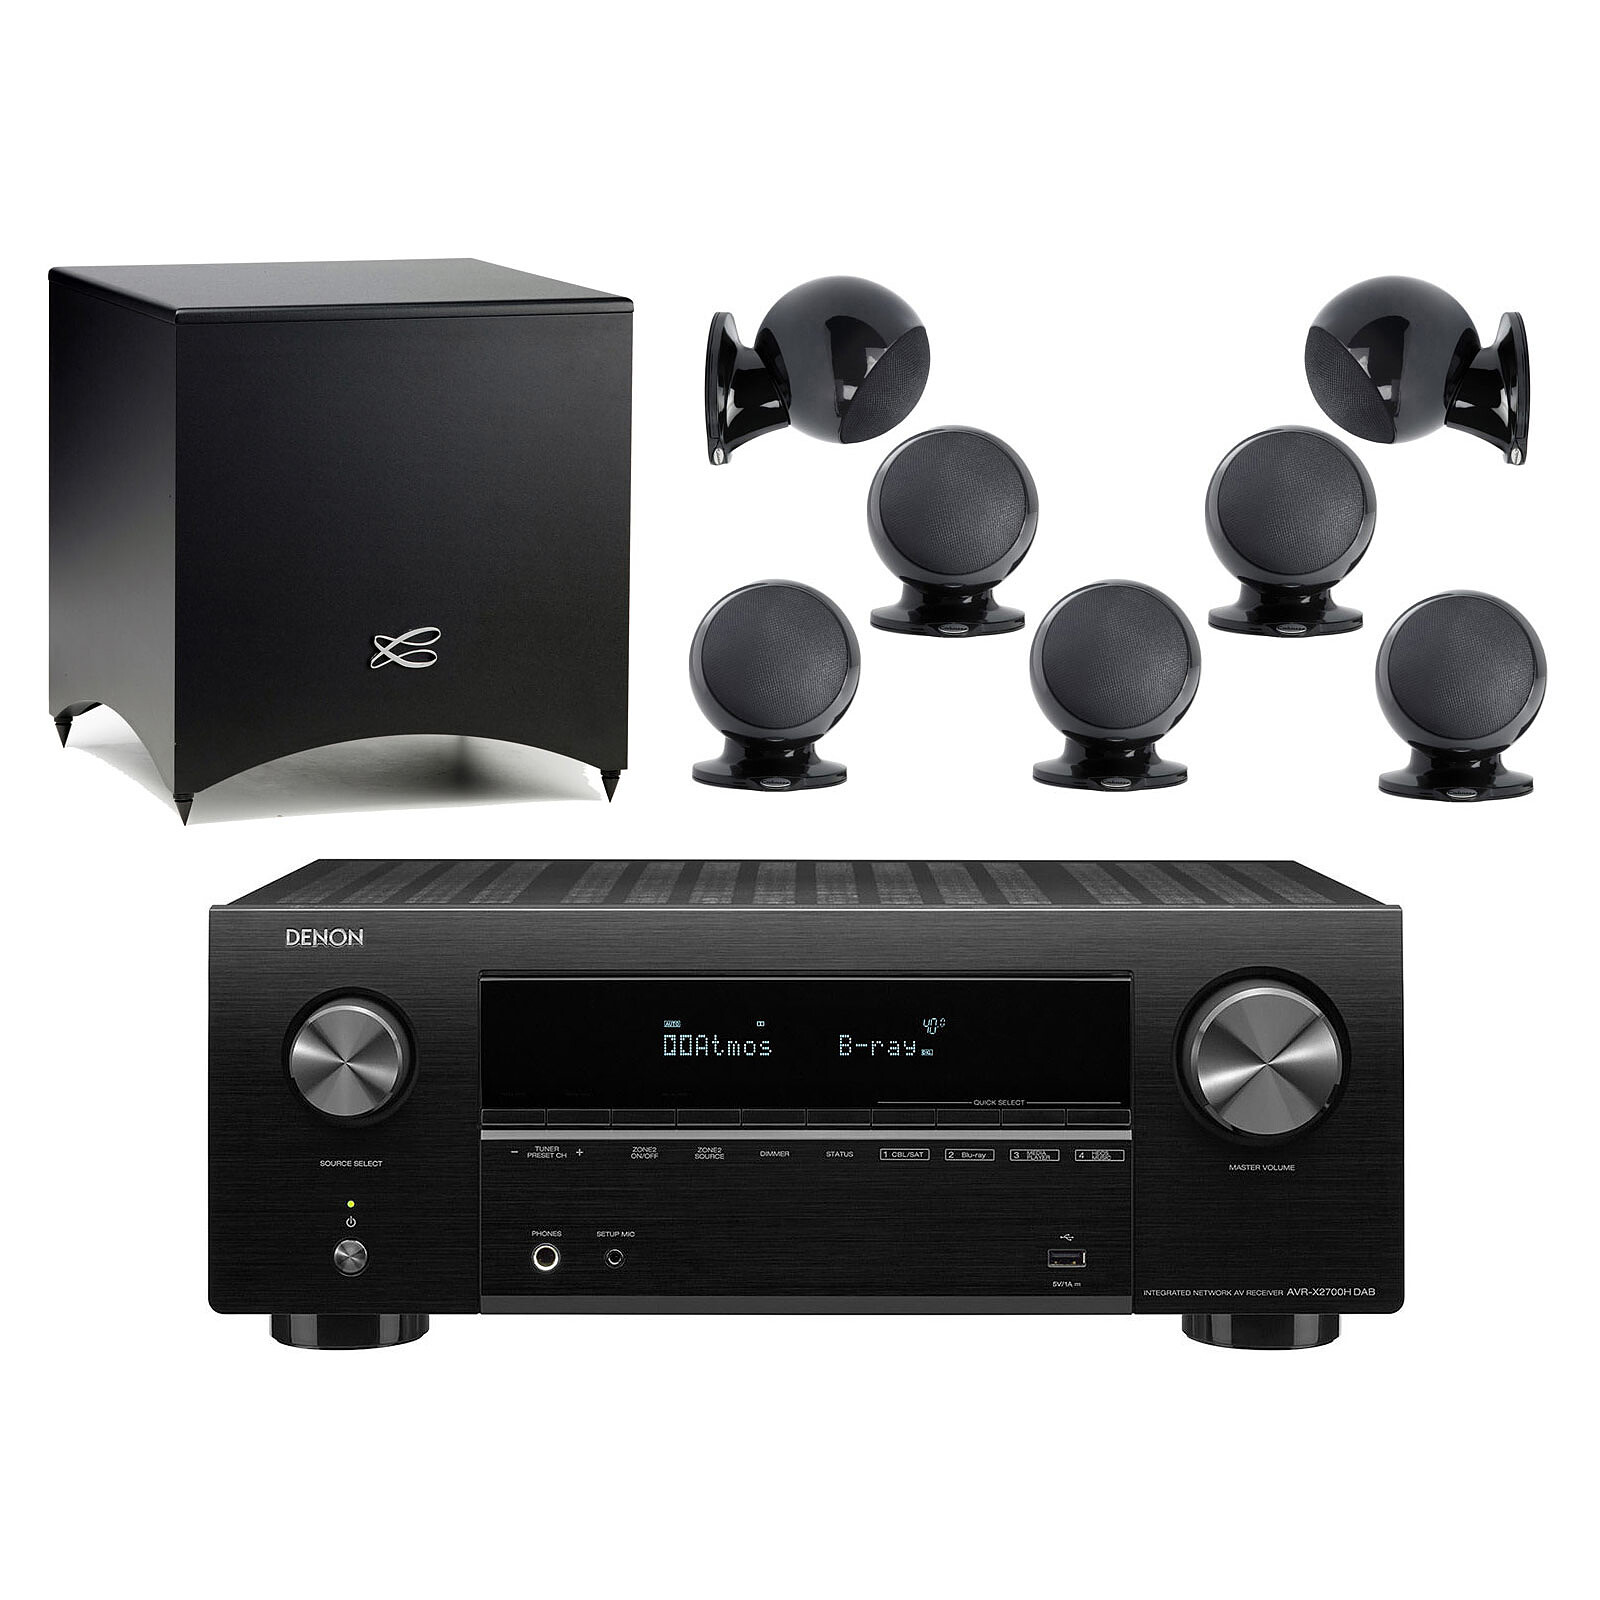 Home Cinema Systems - Cabasse